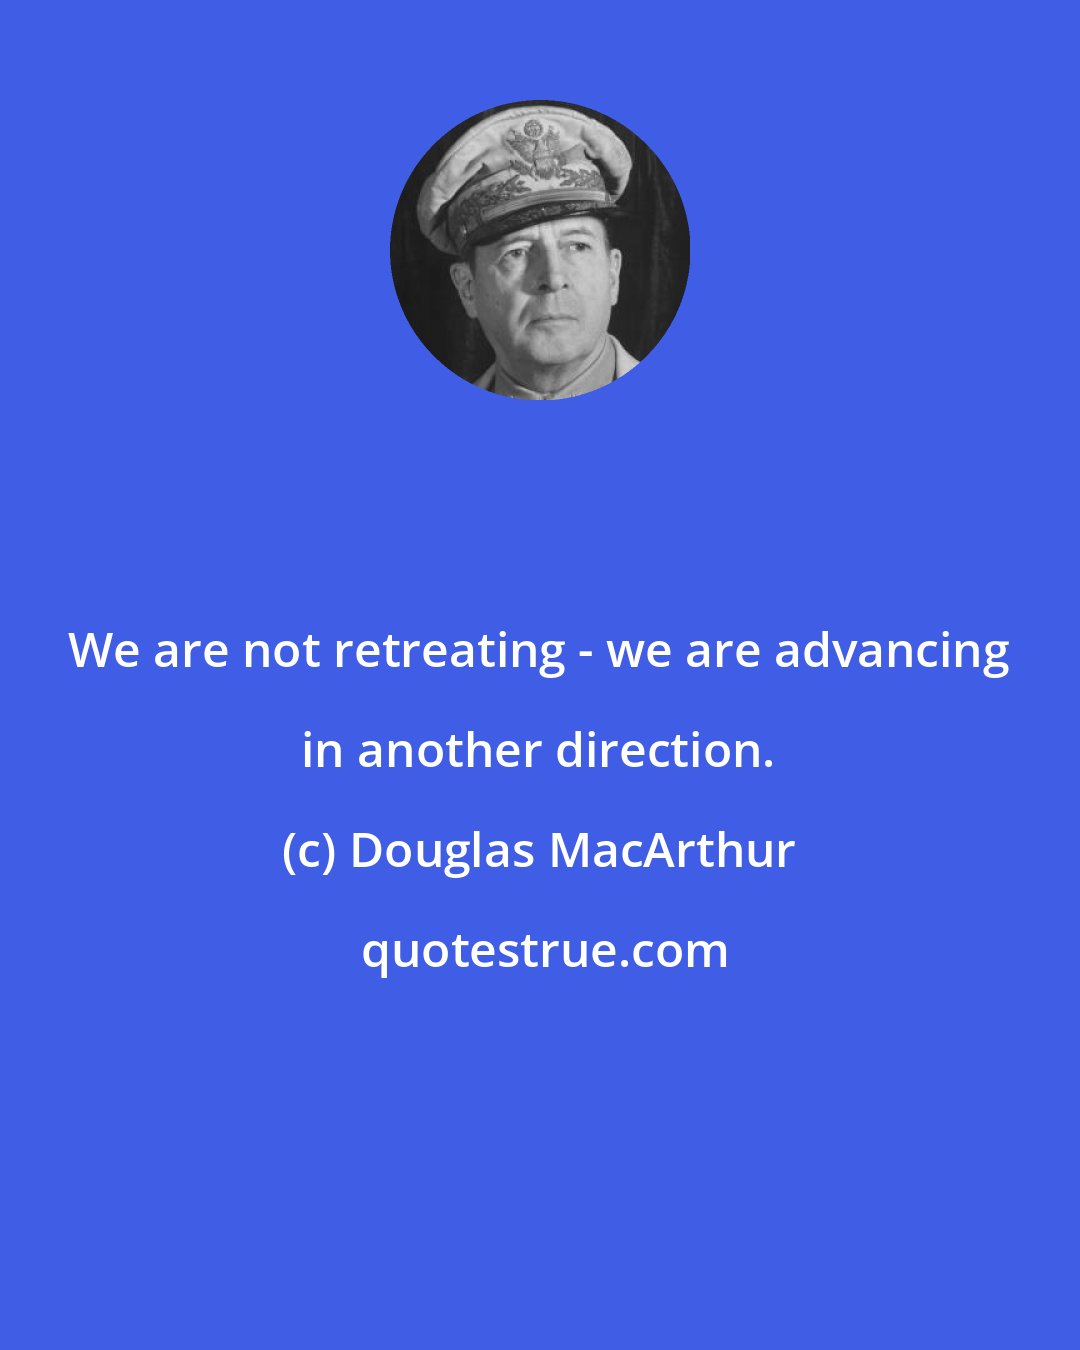 Douglas MacArthur: We are not retreating - we are advancing in another direction.